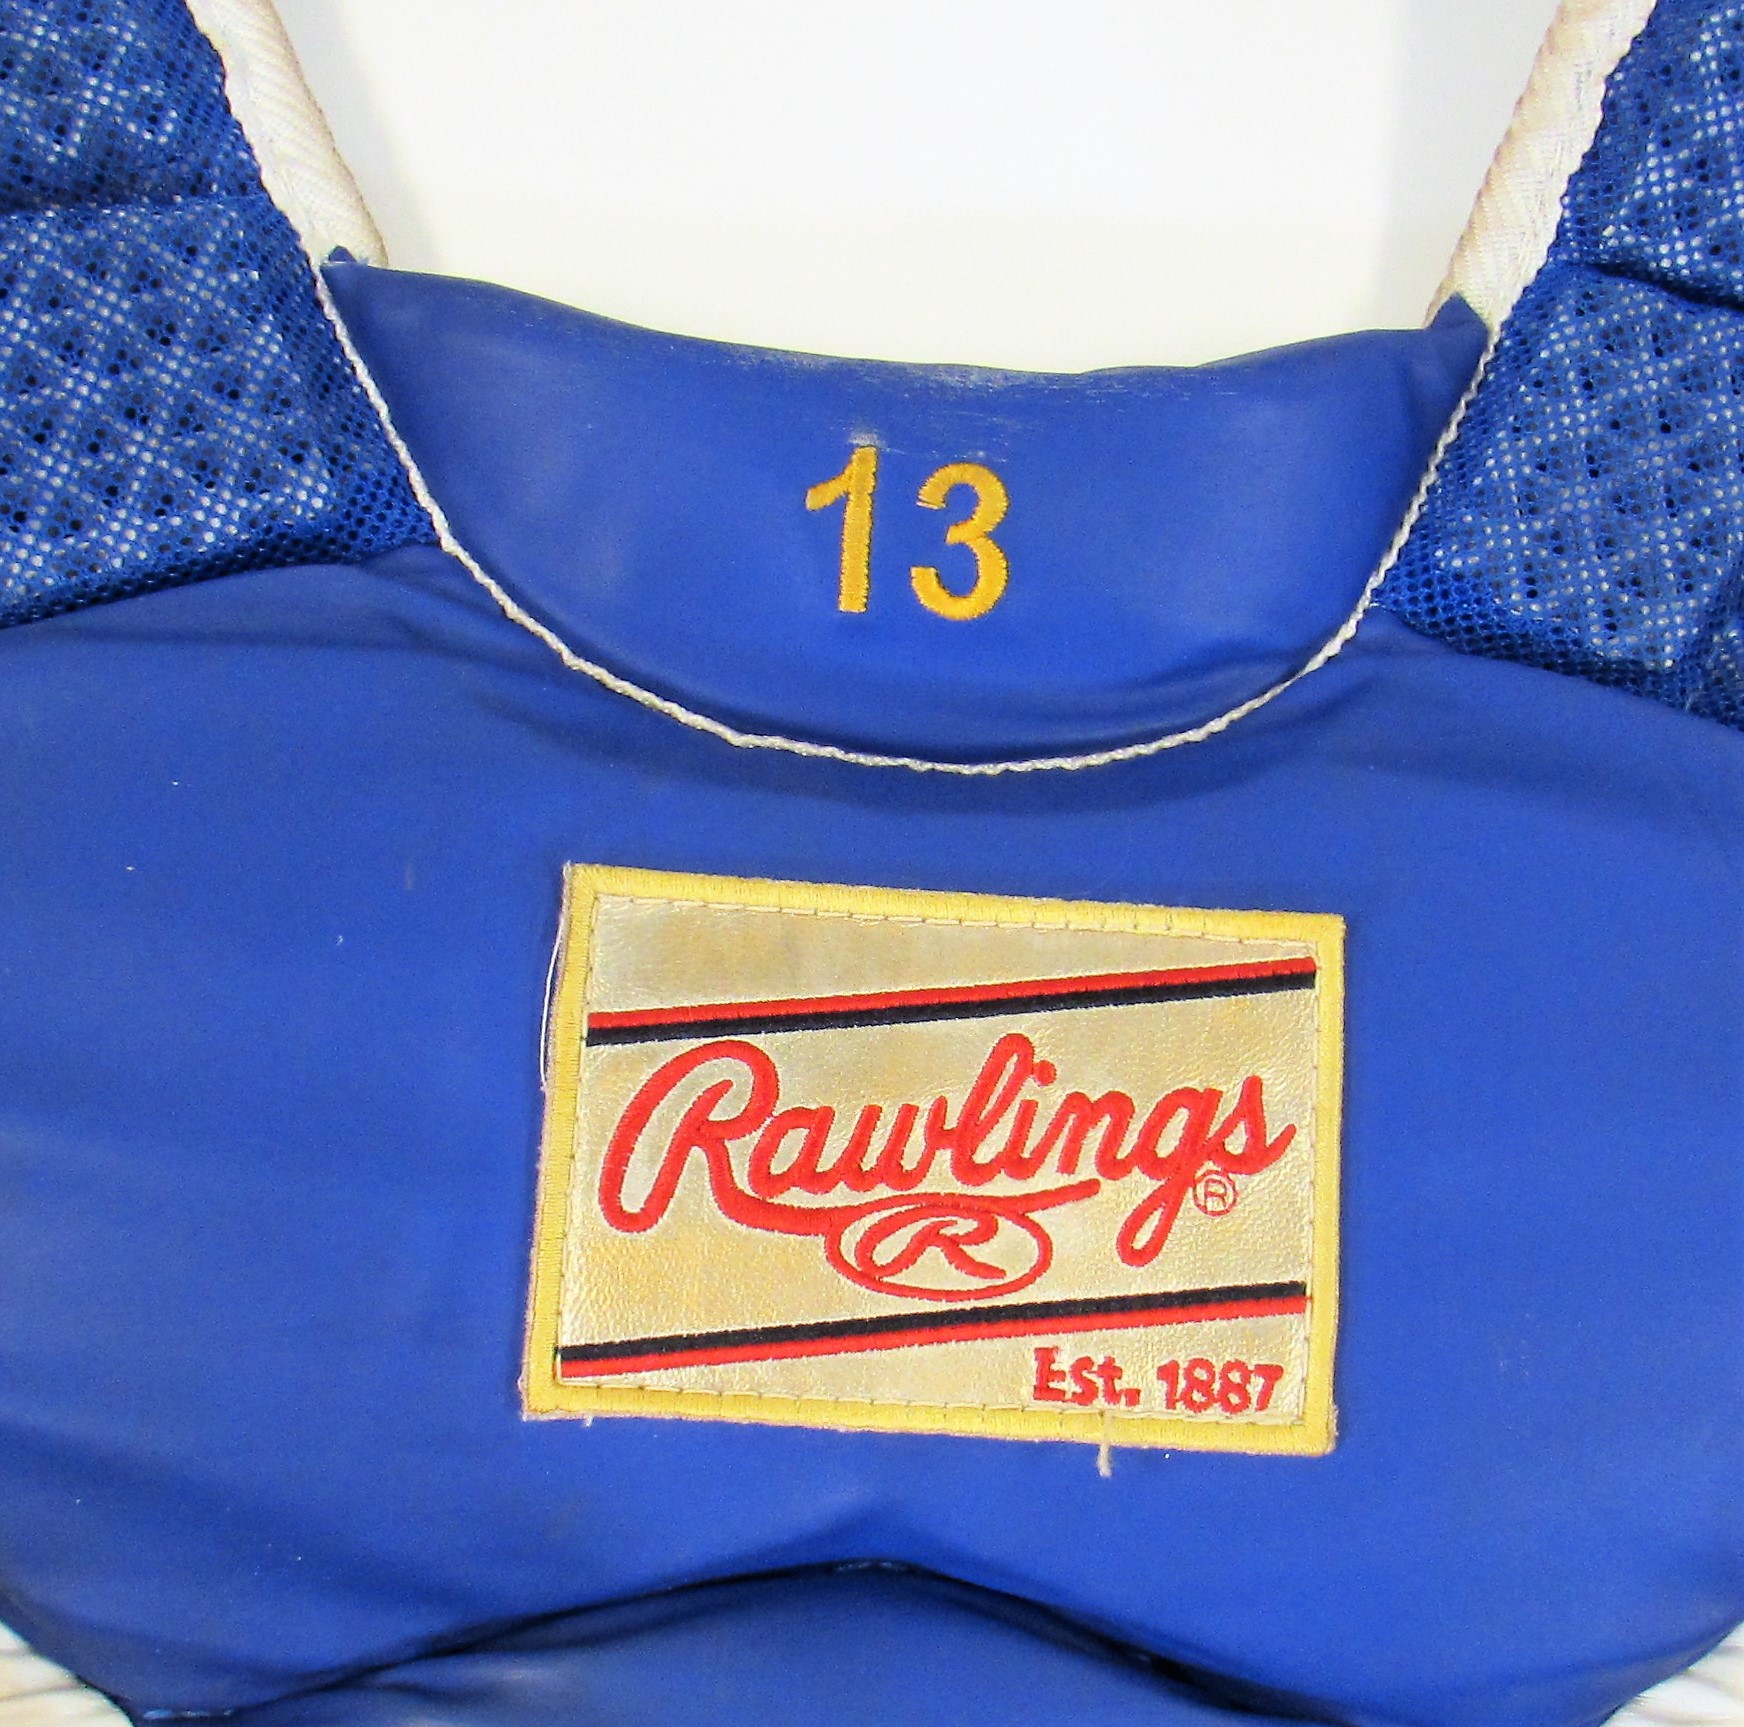 Salvador Perez' Rawlings All Star Chest Protector 